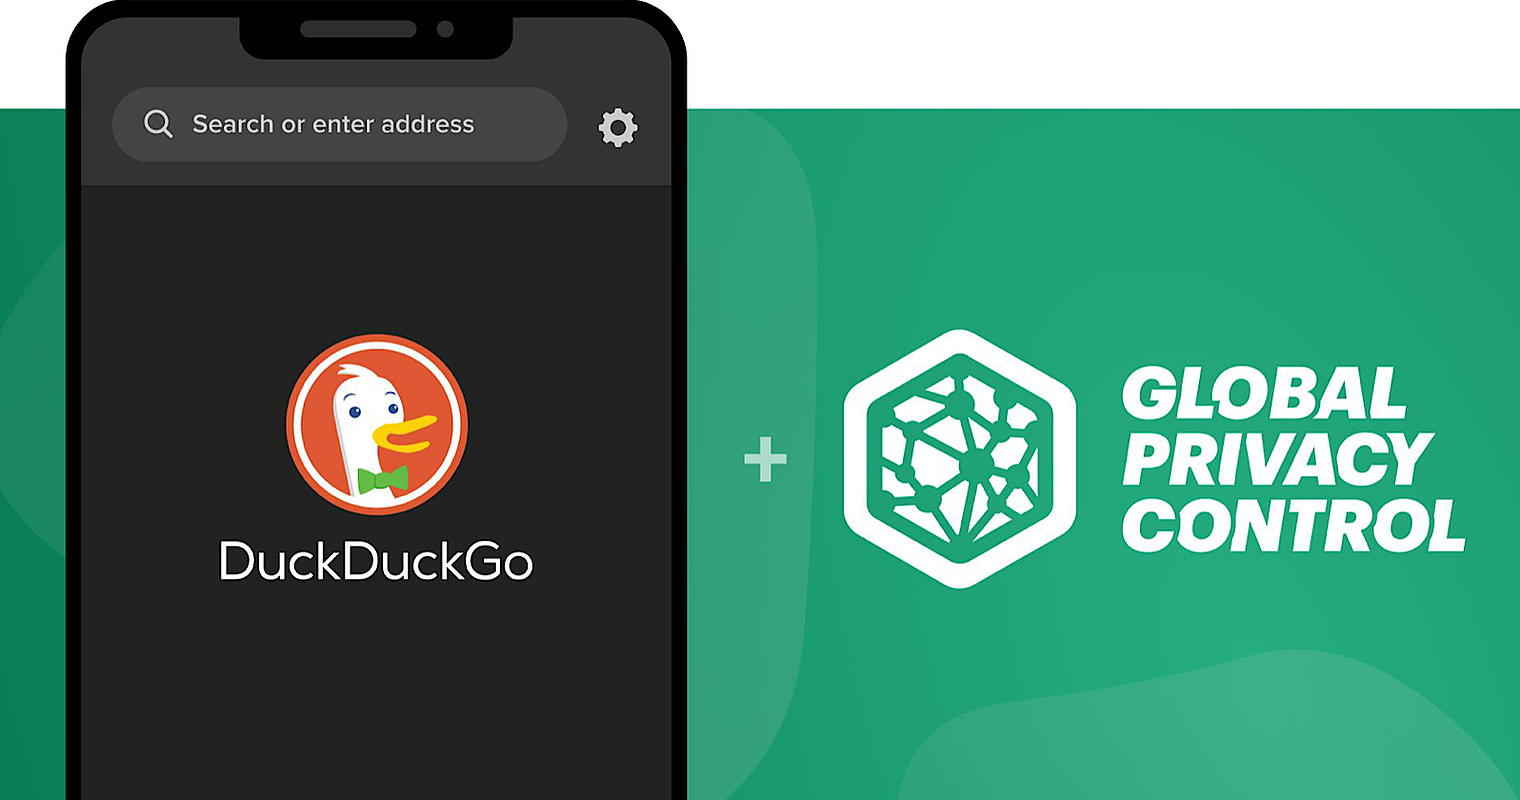 DuckDuckGo App Updated With More Privacy Protections